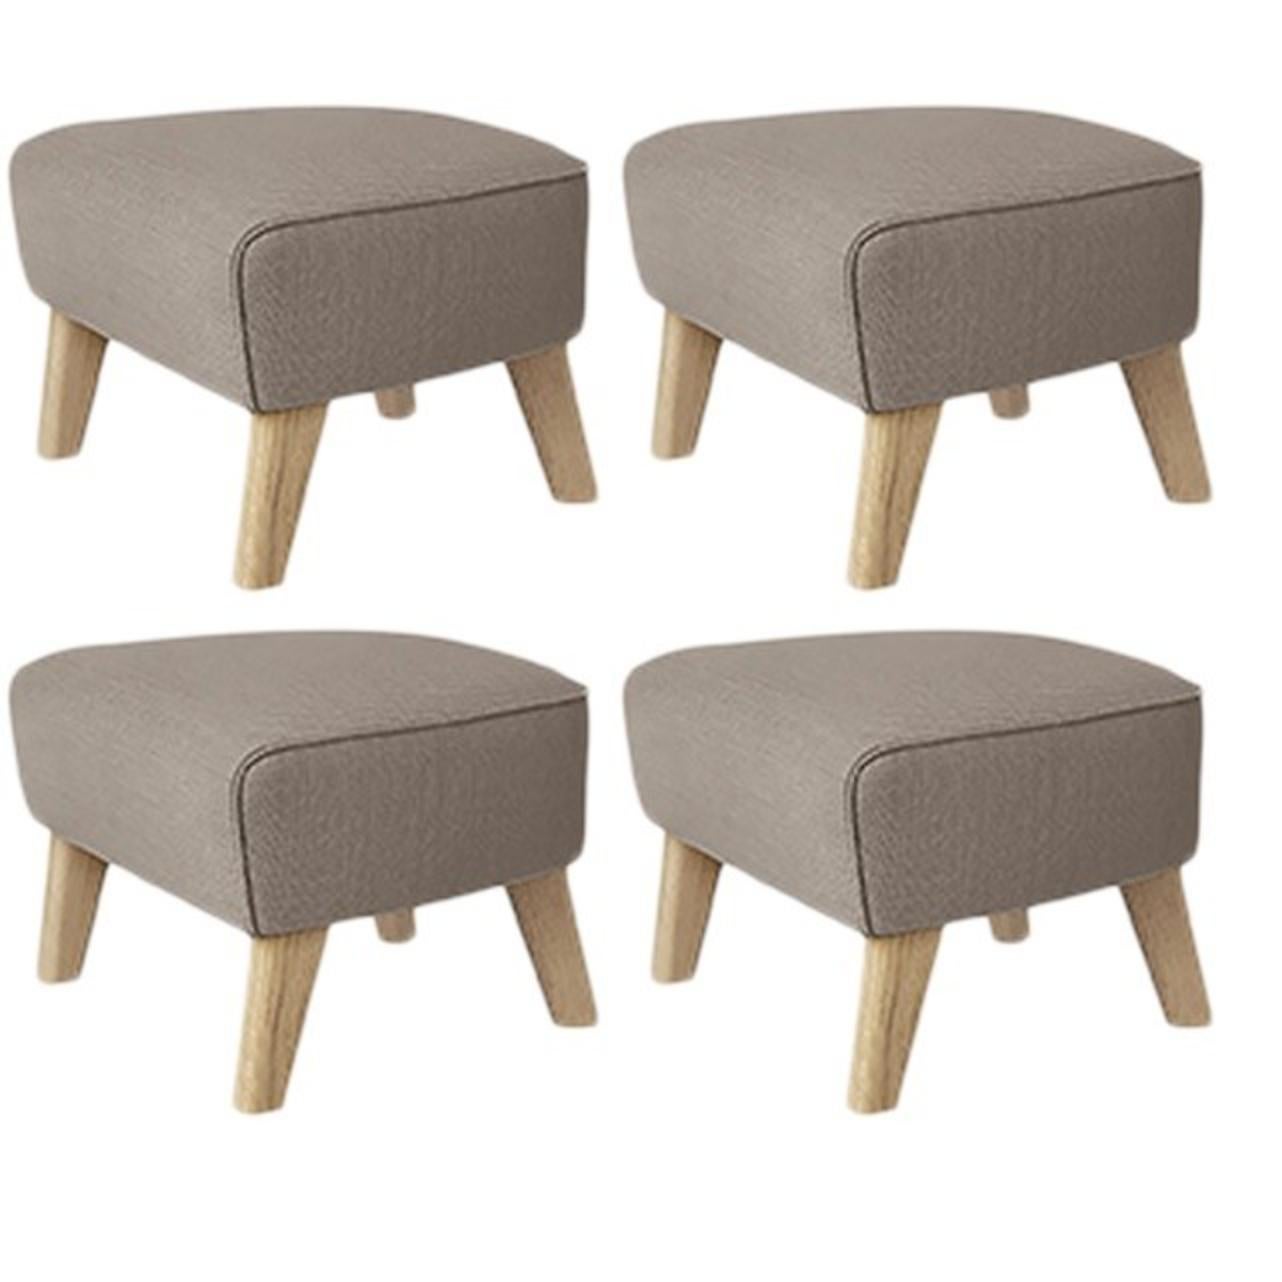 Set of 4 light beige, natural oak raf simons vidar my own chair footstool by Lassen.
Dimensions: W 56 x D 58 x H 40 cm 
Materials: Textile
Also available: Other colors available

The my own chair Footstool has been designed in the same spirit